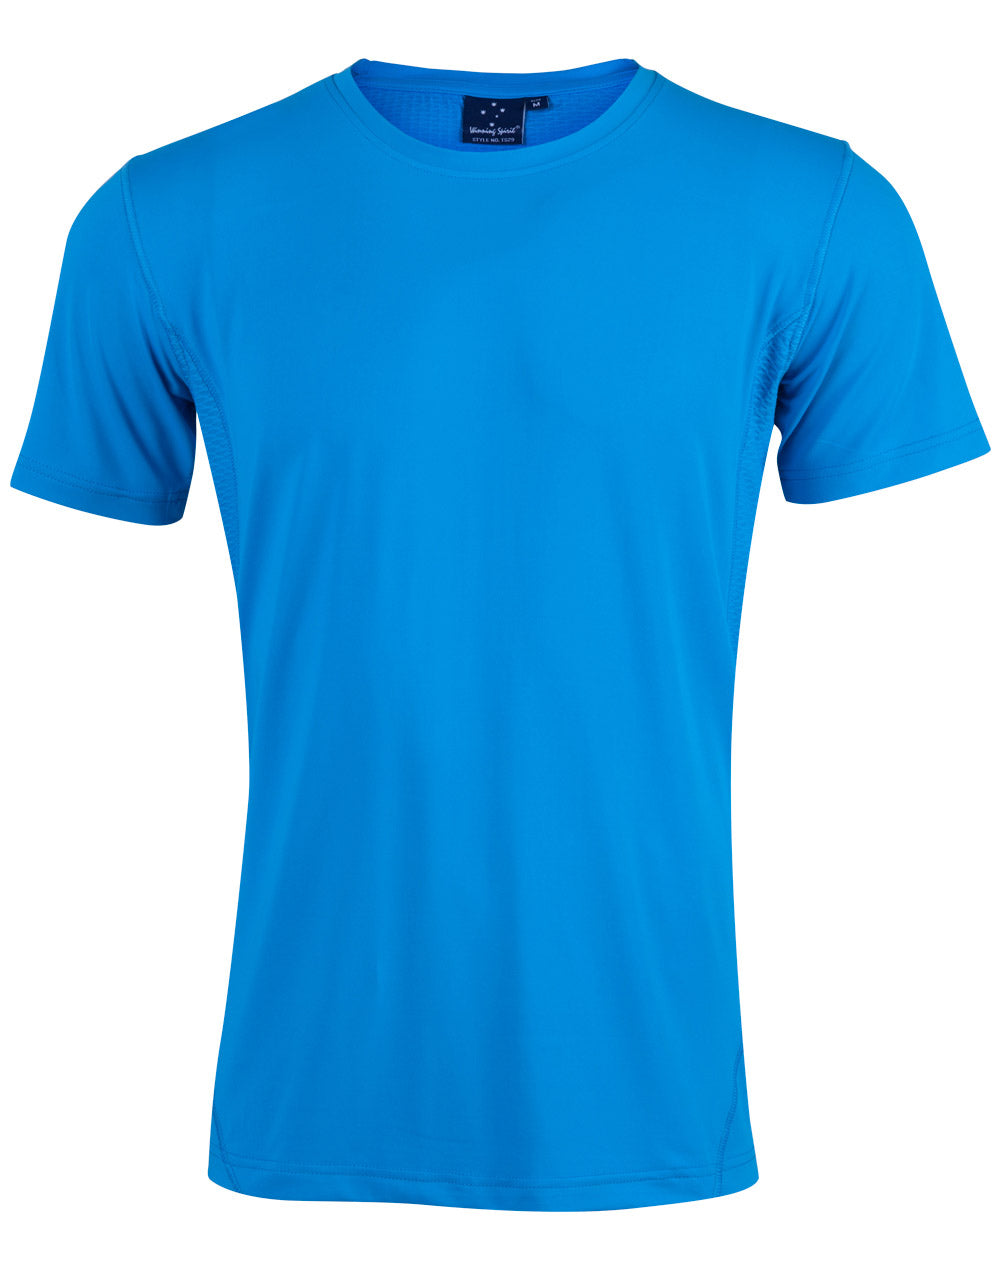 [TS29] Men's Cooldry Stretch Tee